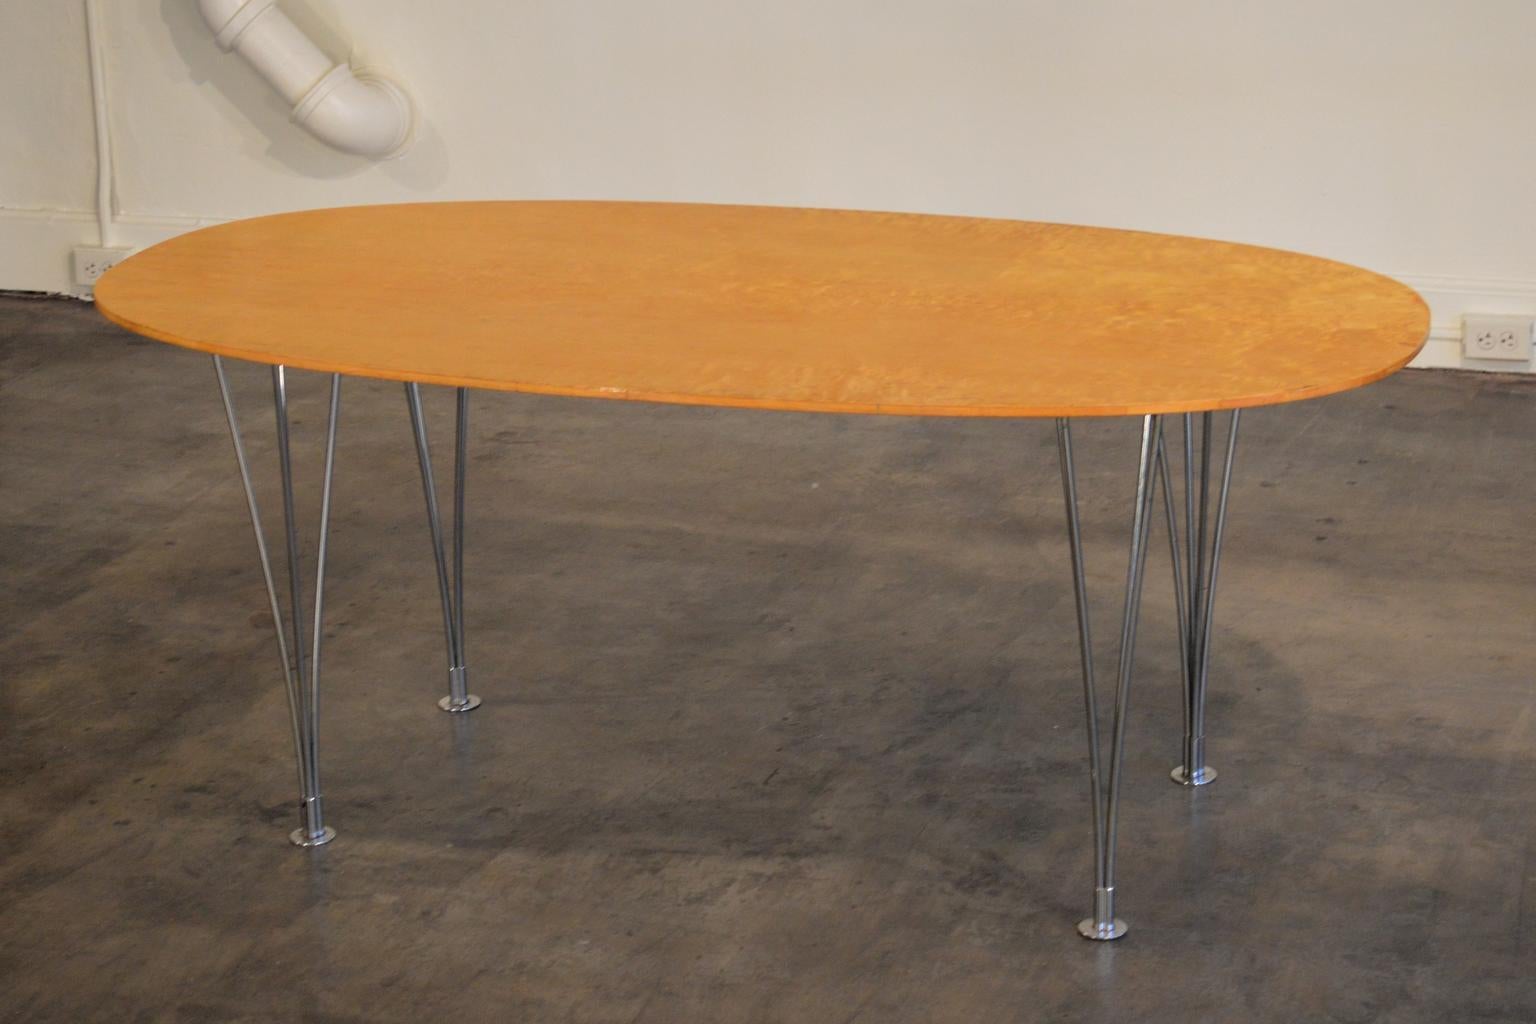 The shape of this table, called 